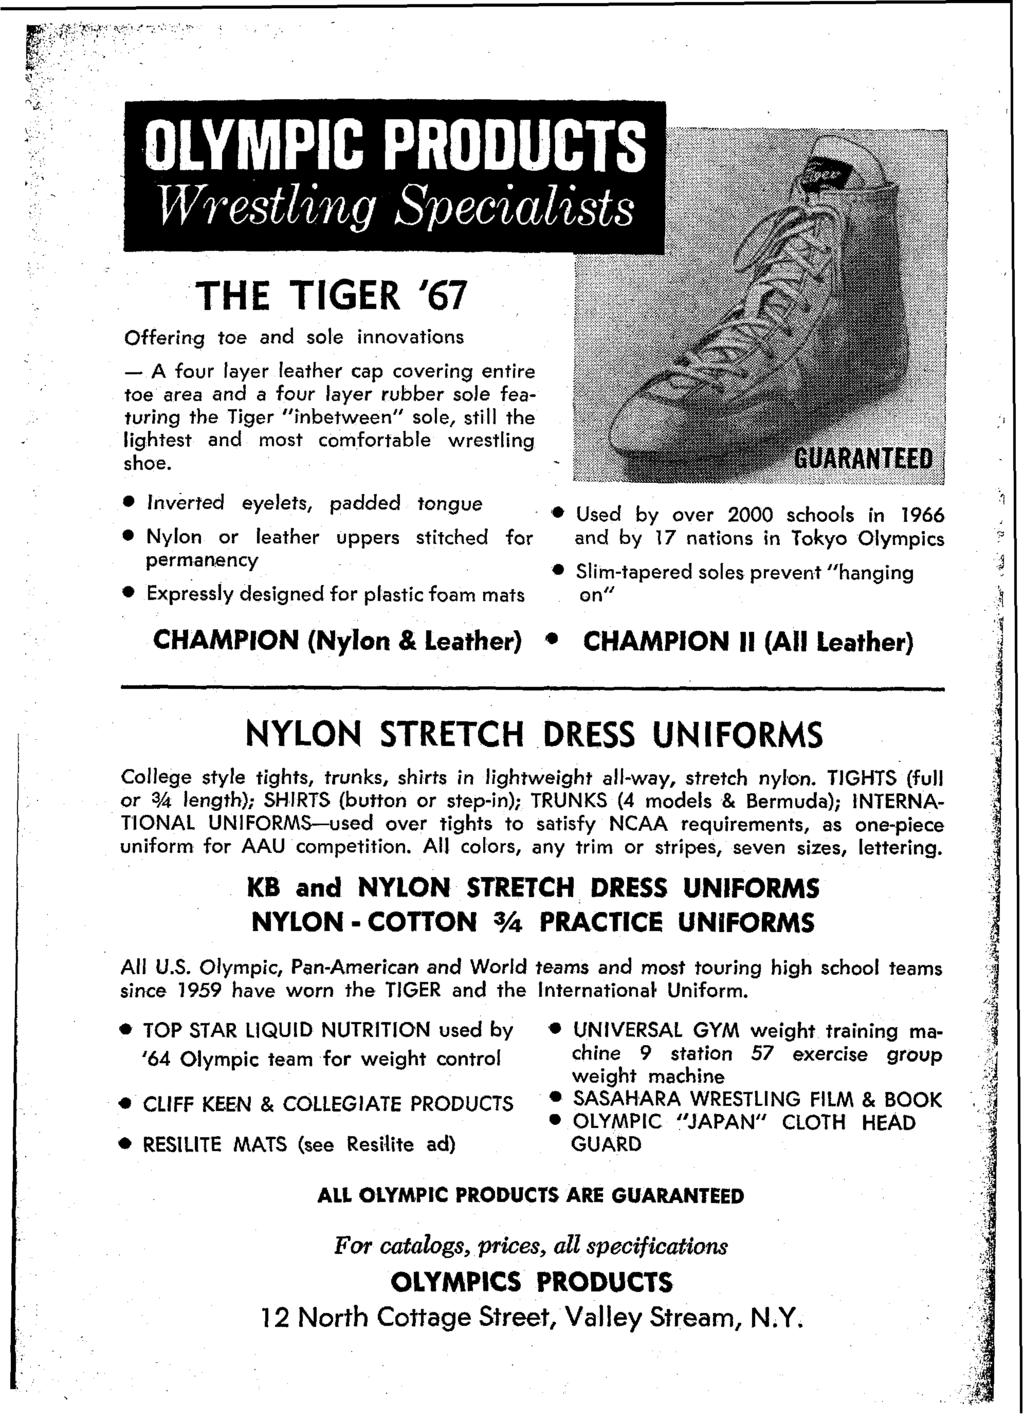 THE TIGER '67 Offering toe and sole innovations - A four layer leather cap covering entire toe area and a four layer rubber sole featuring the Tiger "inbetween" sole, still the f$ 2: lightest and